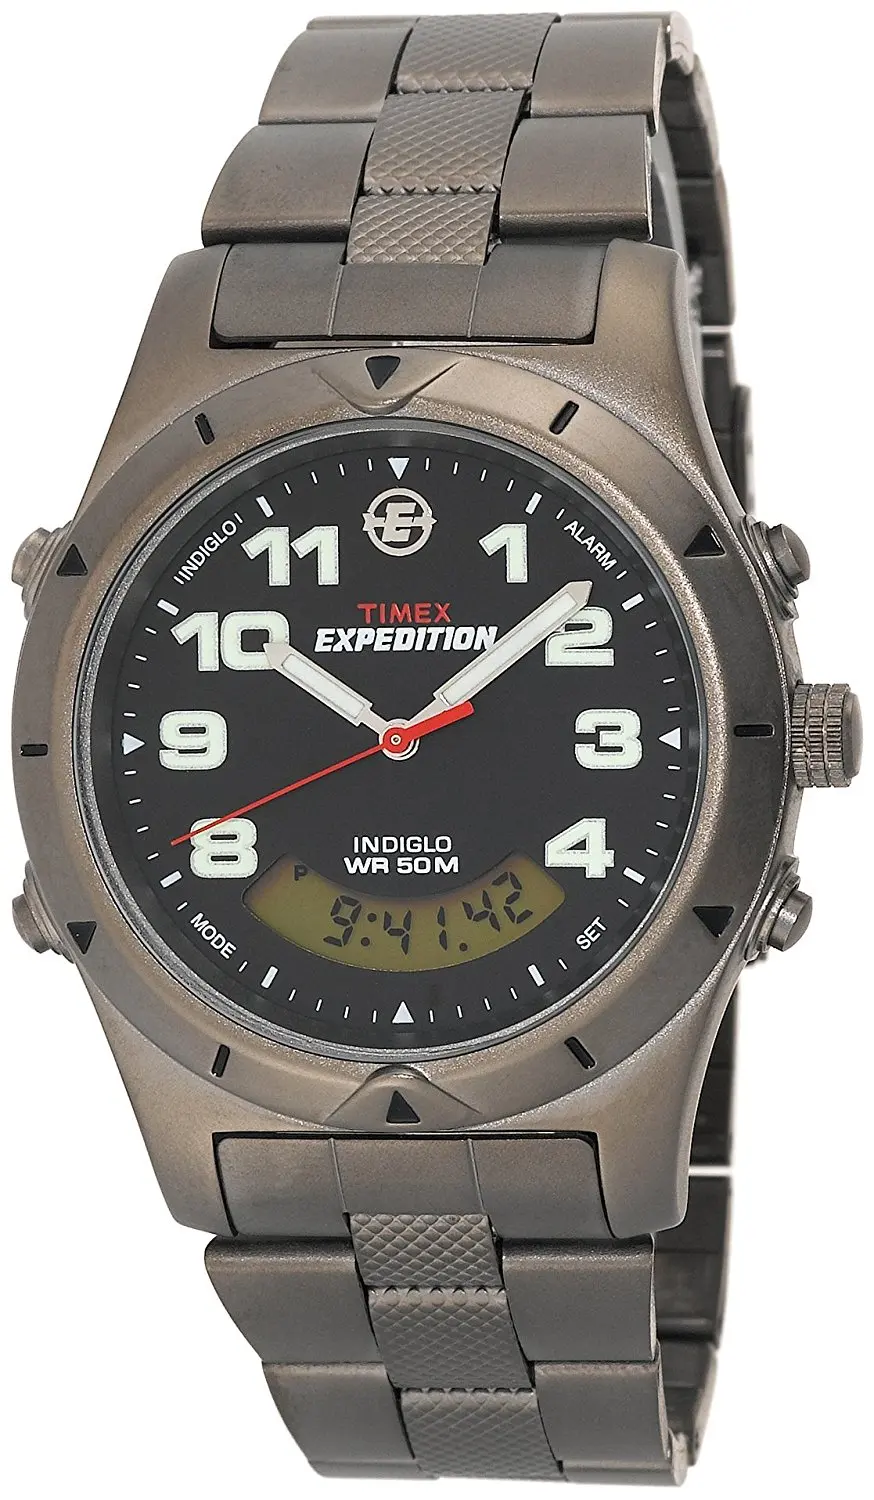 timex expedition mf13 price